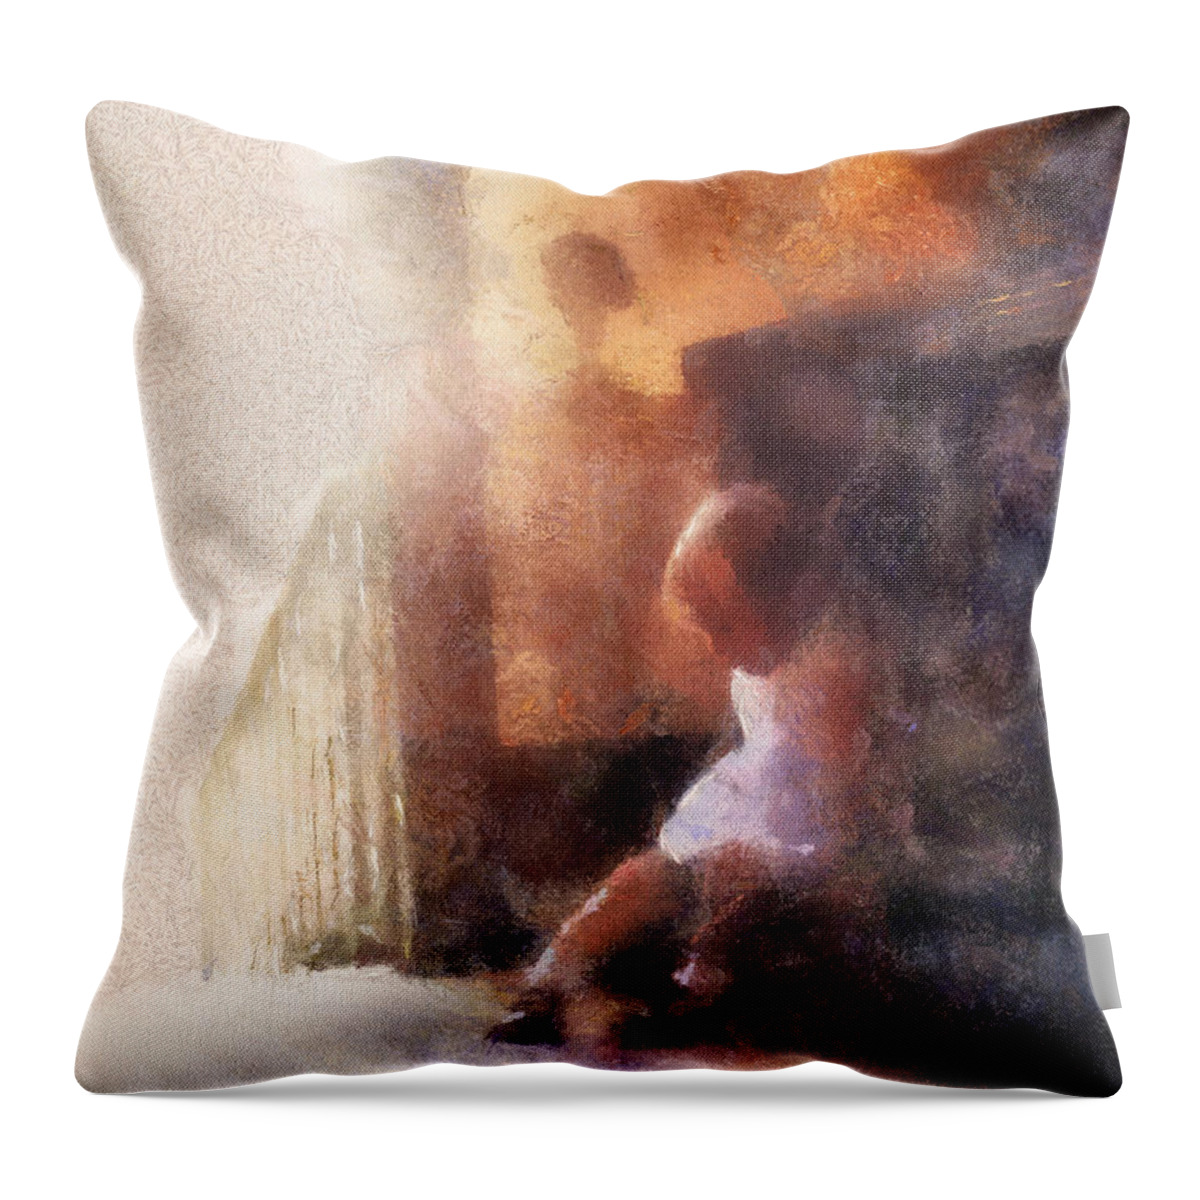 Girl Throw Pillow featuring the photograph Little Girl Thinking by Nora Martinez